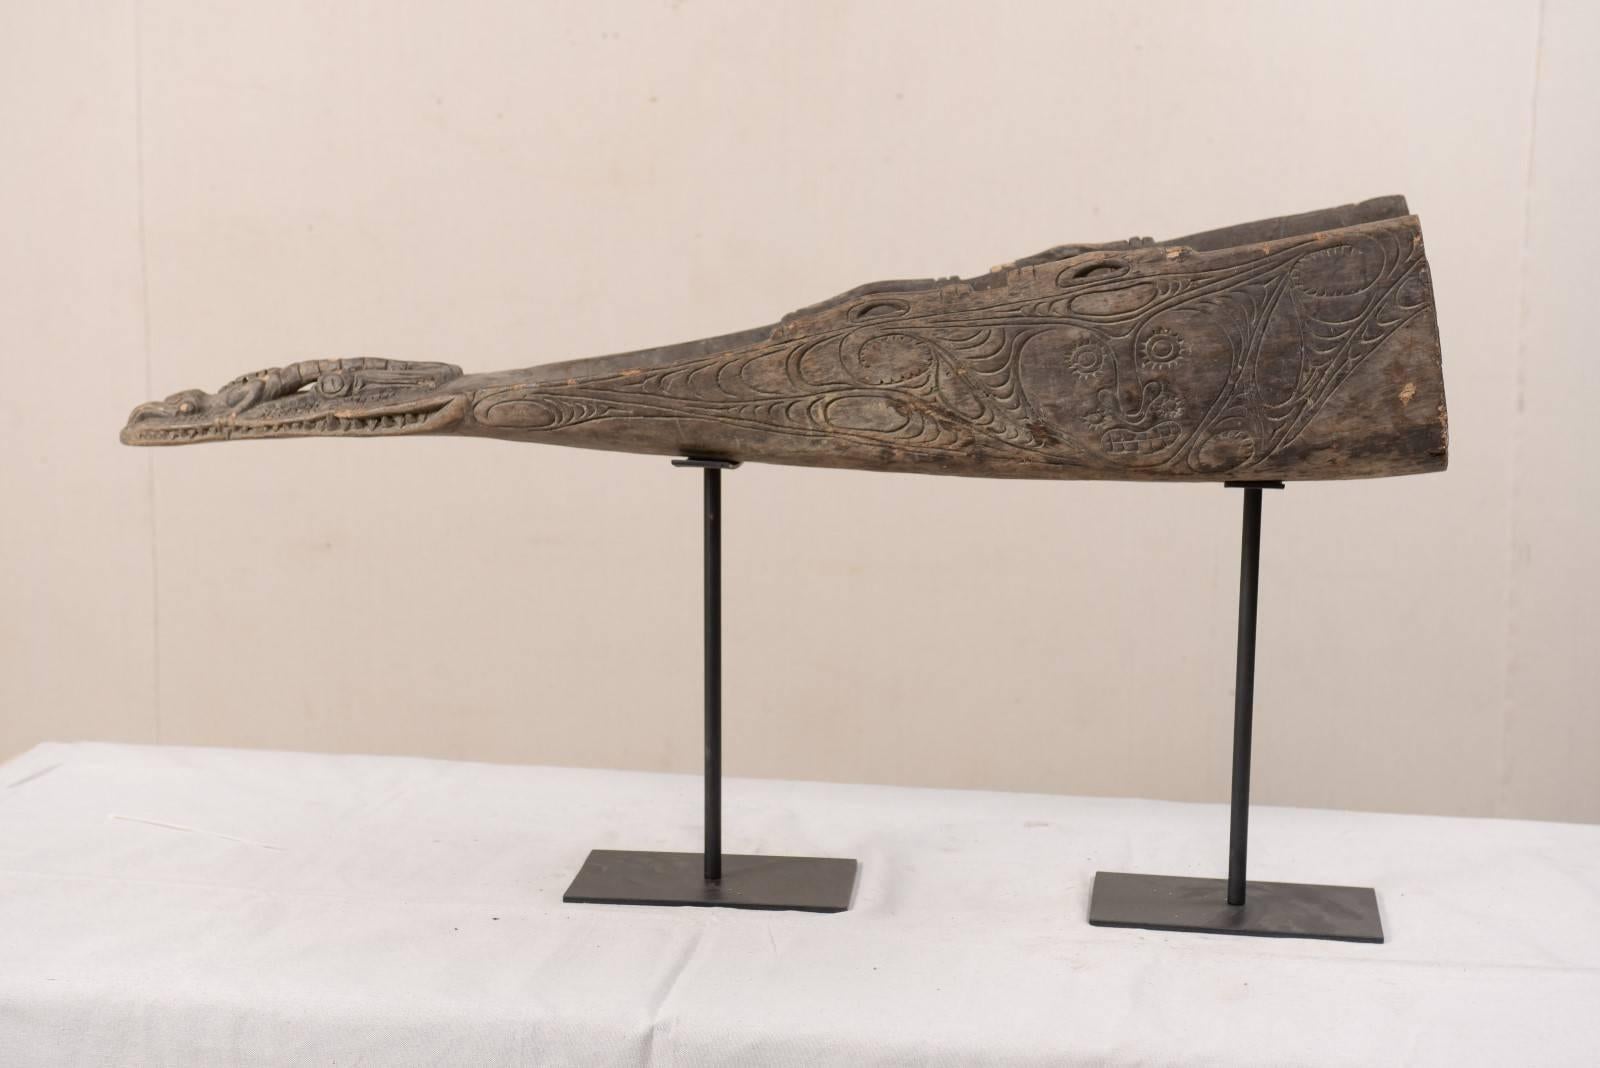 Hand-Carved Wood Boat Prow on Iron Stand from Papua New Guinea, Mid-20th Century 4